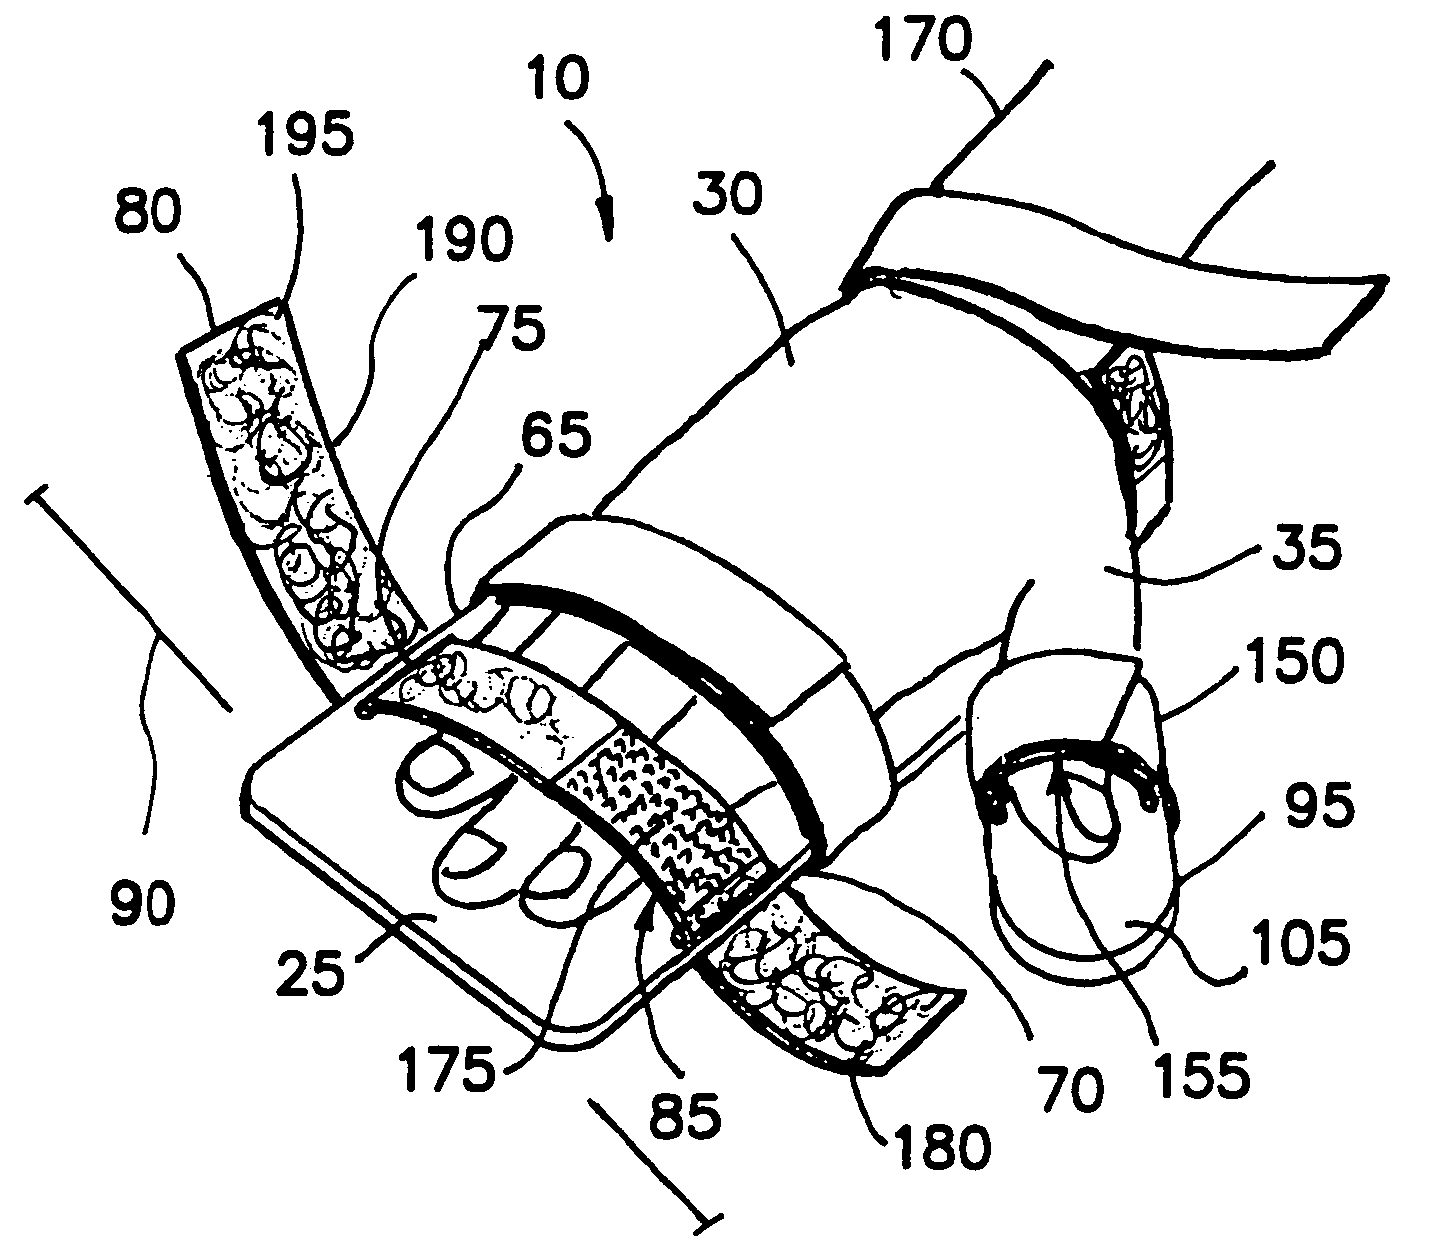 Antispasticity aid device and related accessories